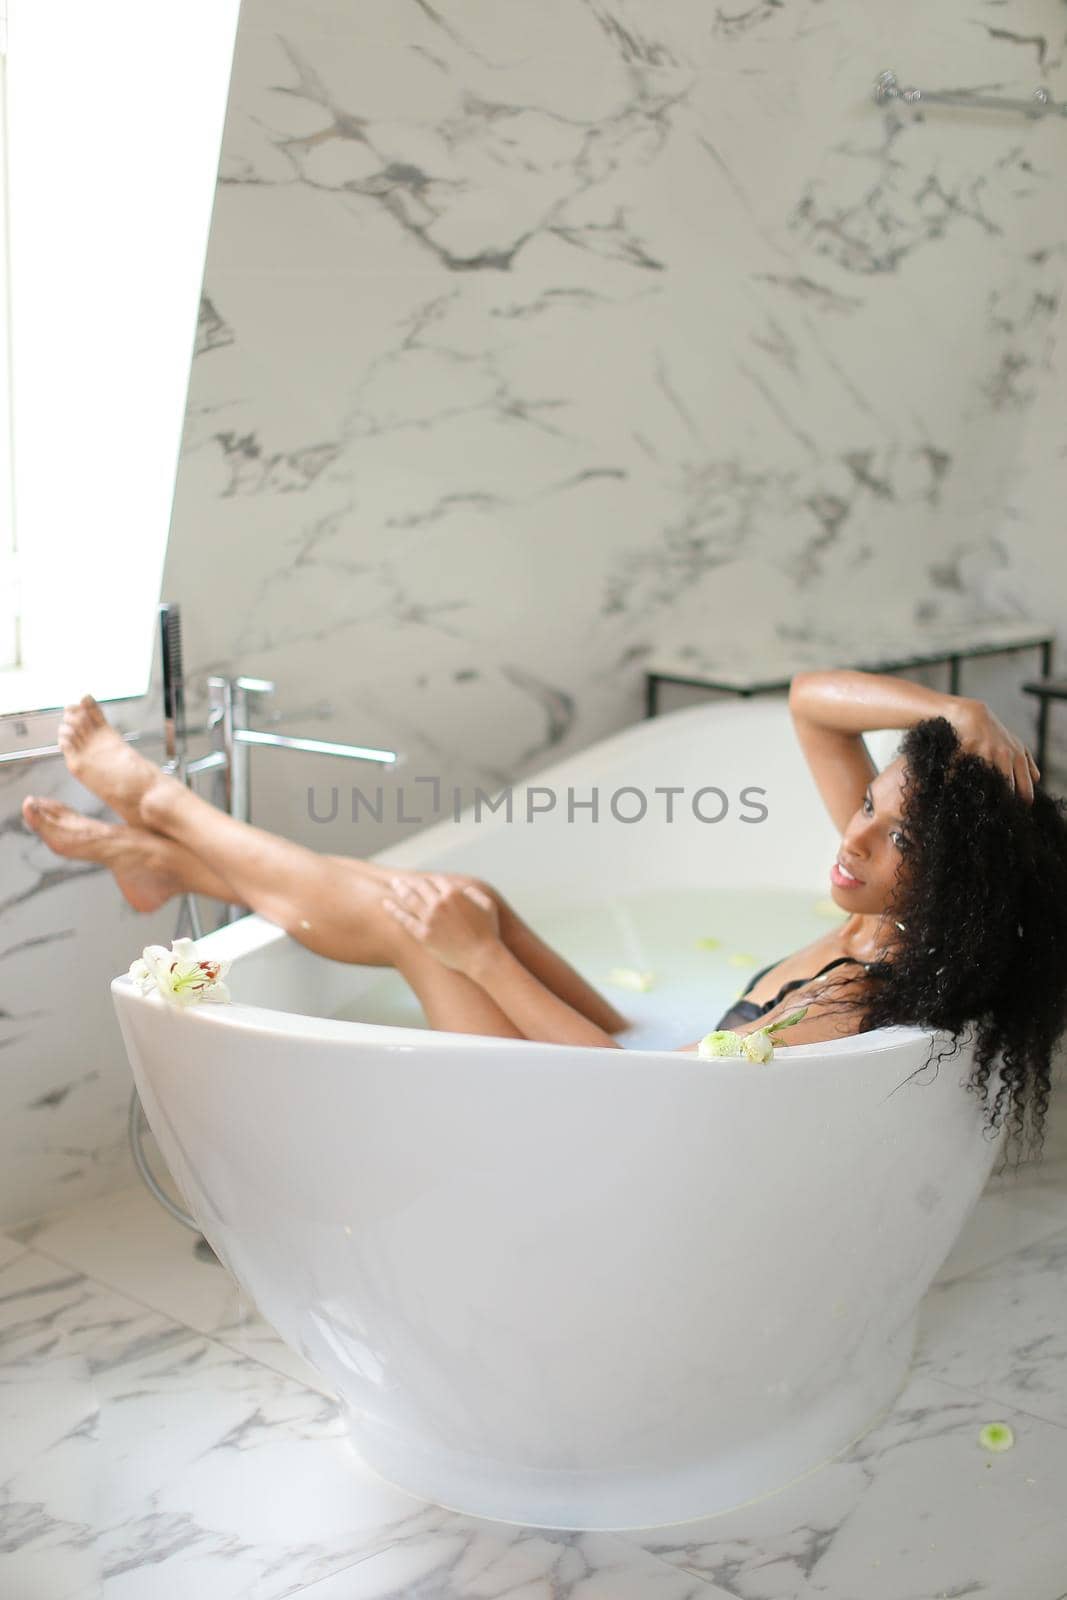 Young beautiful afro american woman taking bath and wearing black swimsuit. Concept of milk bathroom photo shoot and morning hygiene.